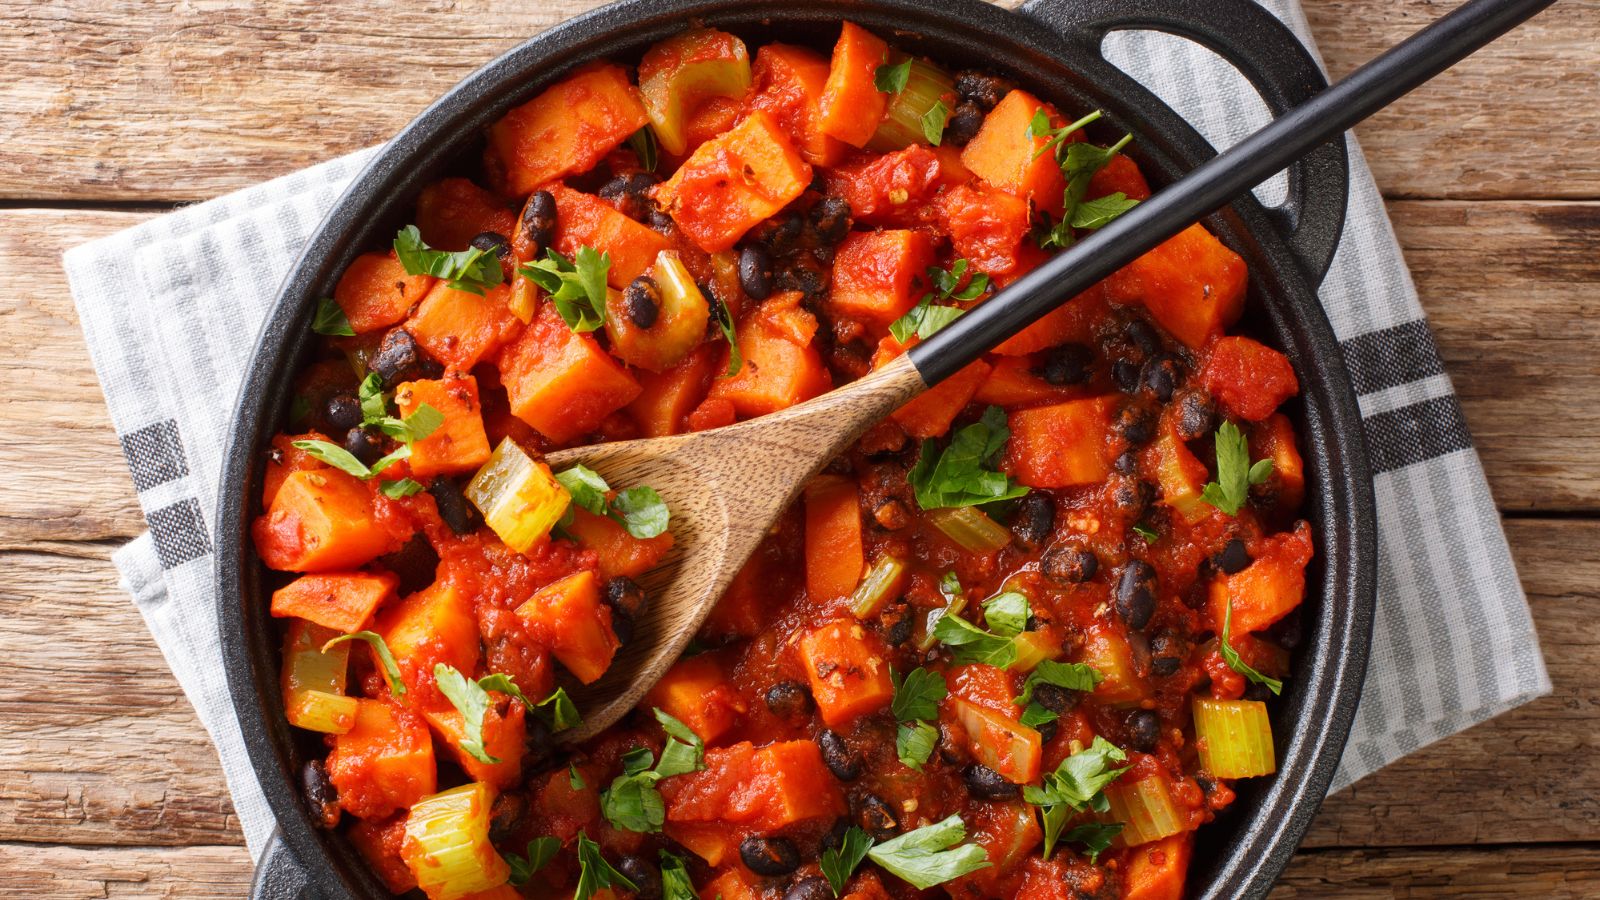 Discover 22 Irresistible Sweet Potatoes Recipes